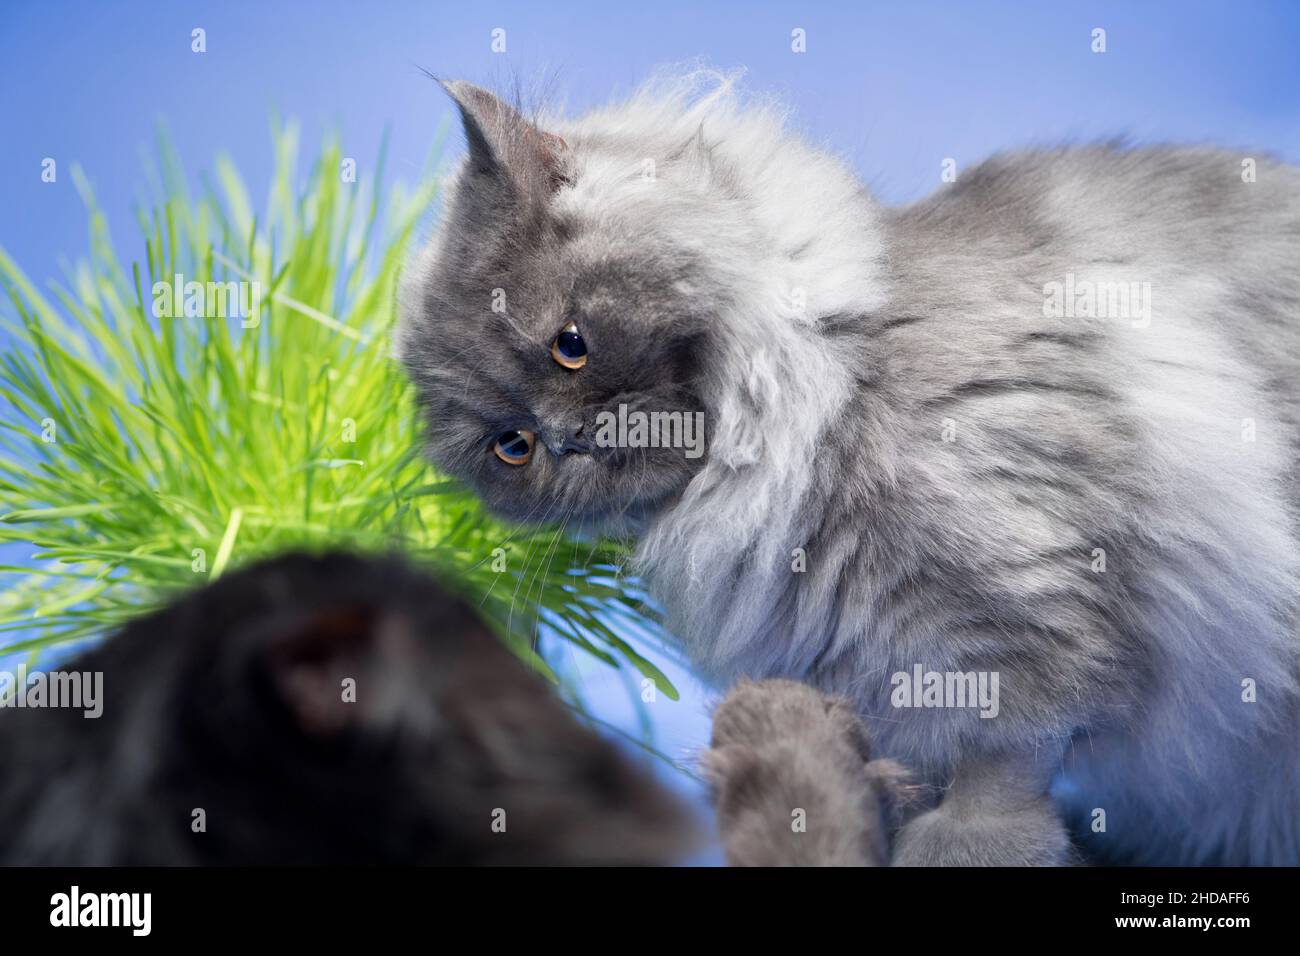 Funny grey cat looking angry at another cat. Stock Photo